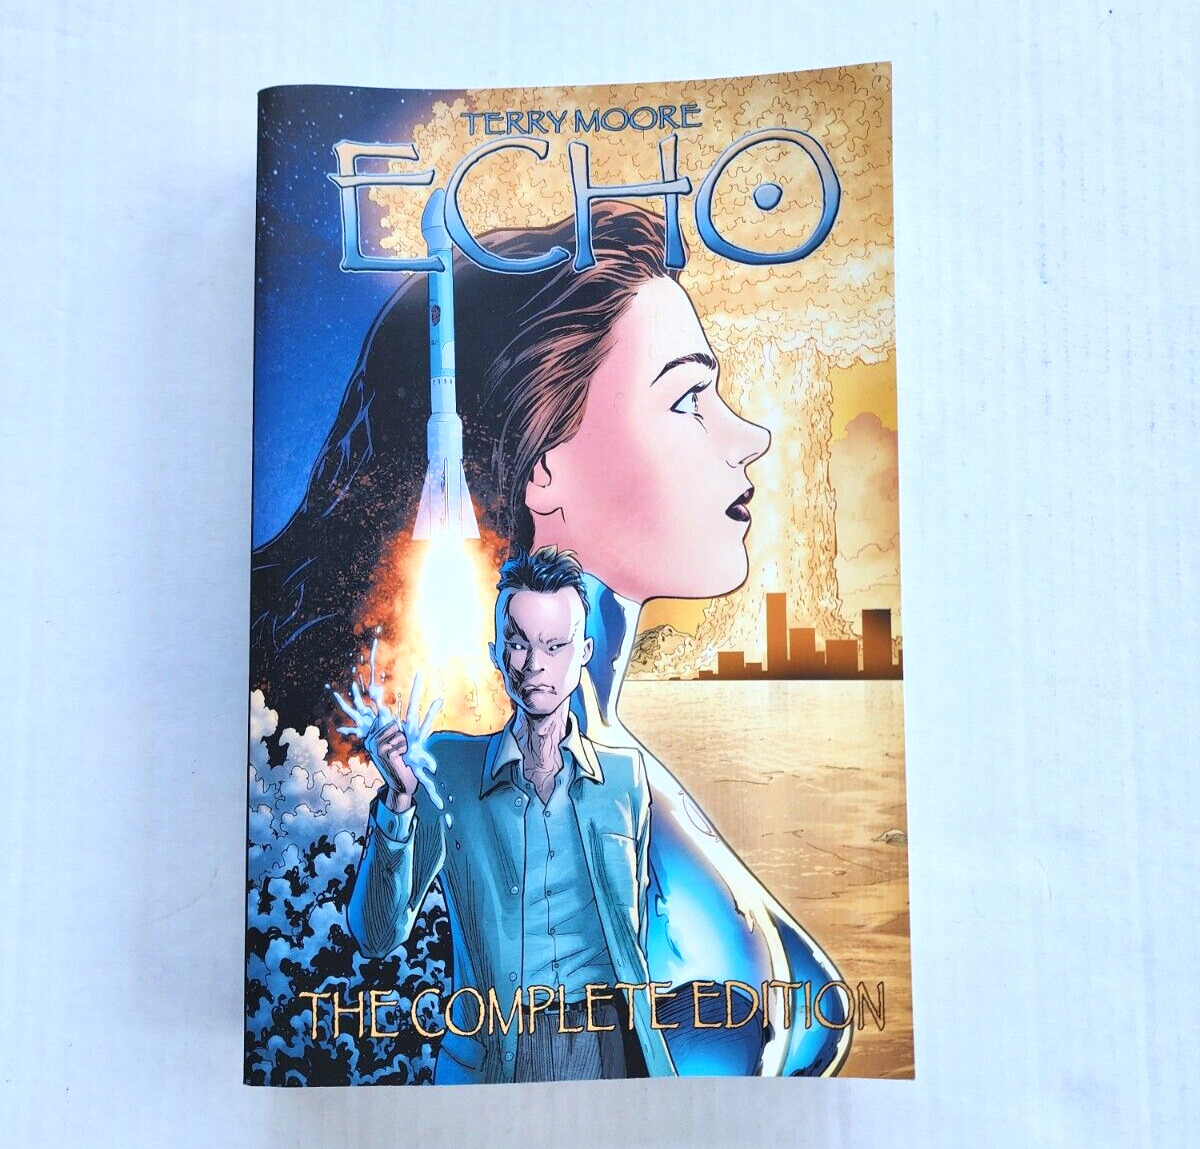 Echo the Complete Edition Abstract Studio Comics 2011 Terry Moore Paperback TPB